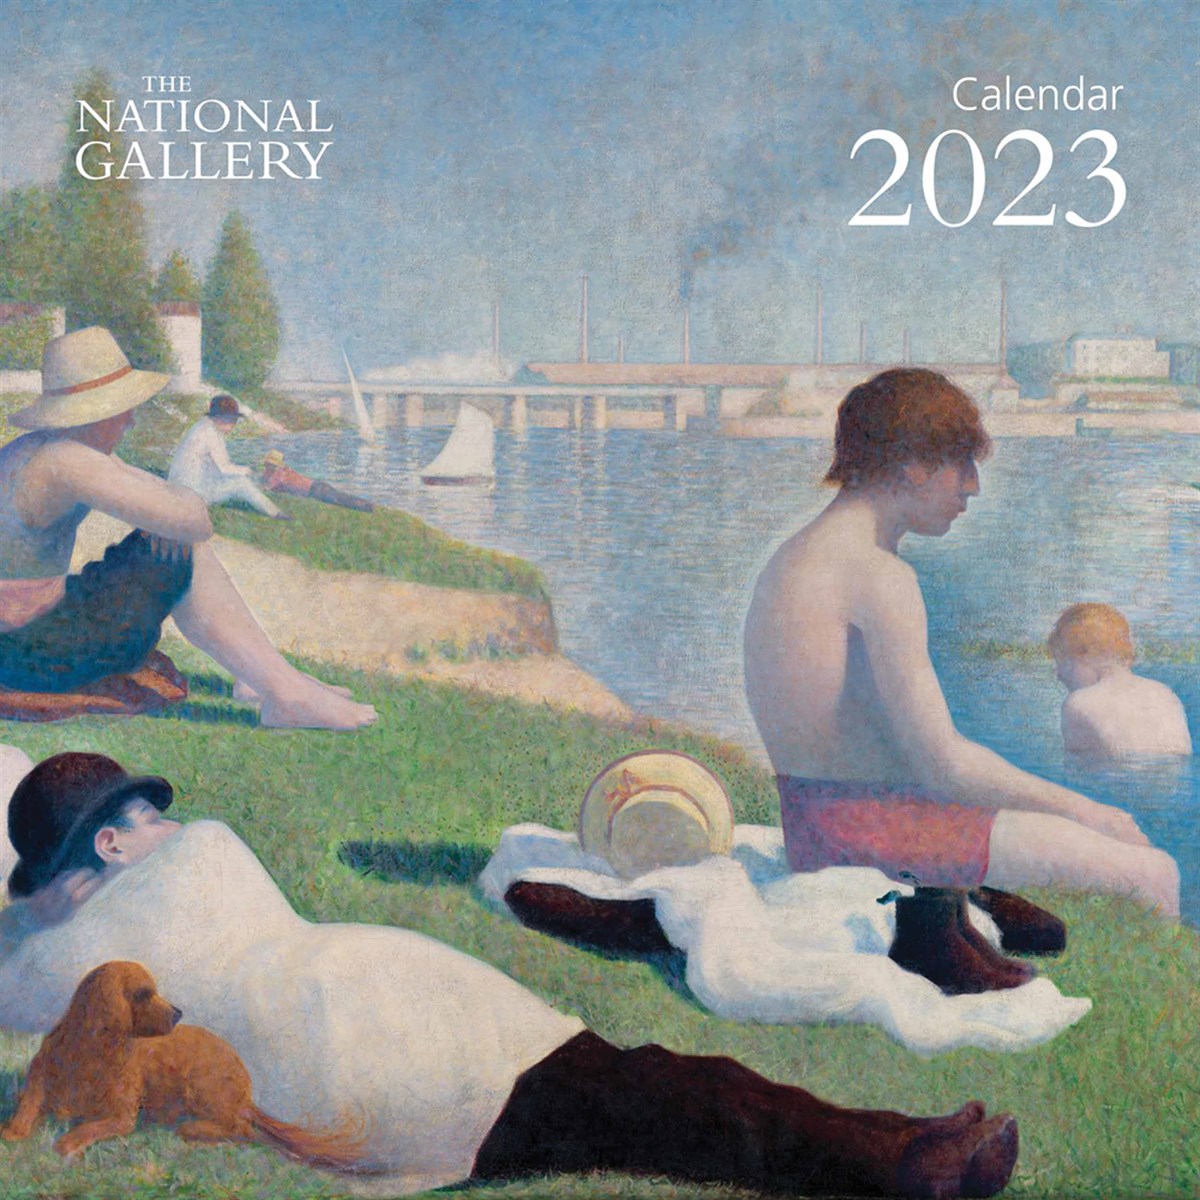 The National Gallery 2023 Calendars